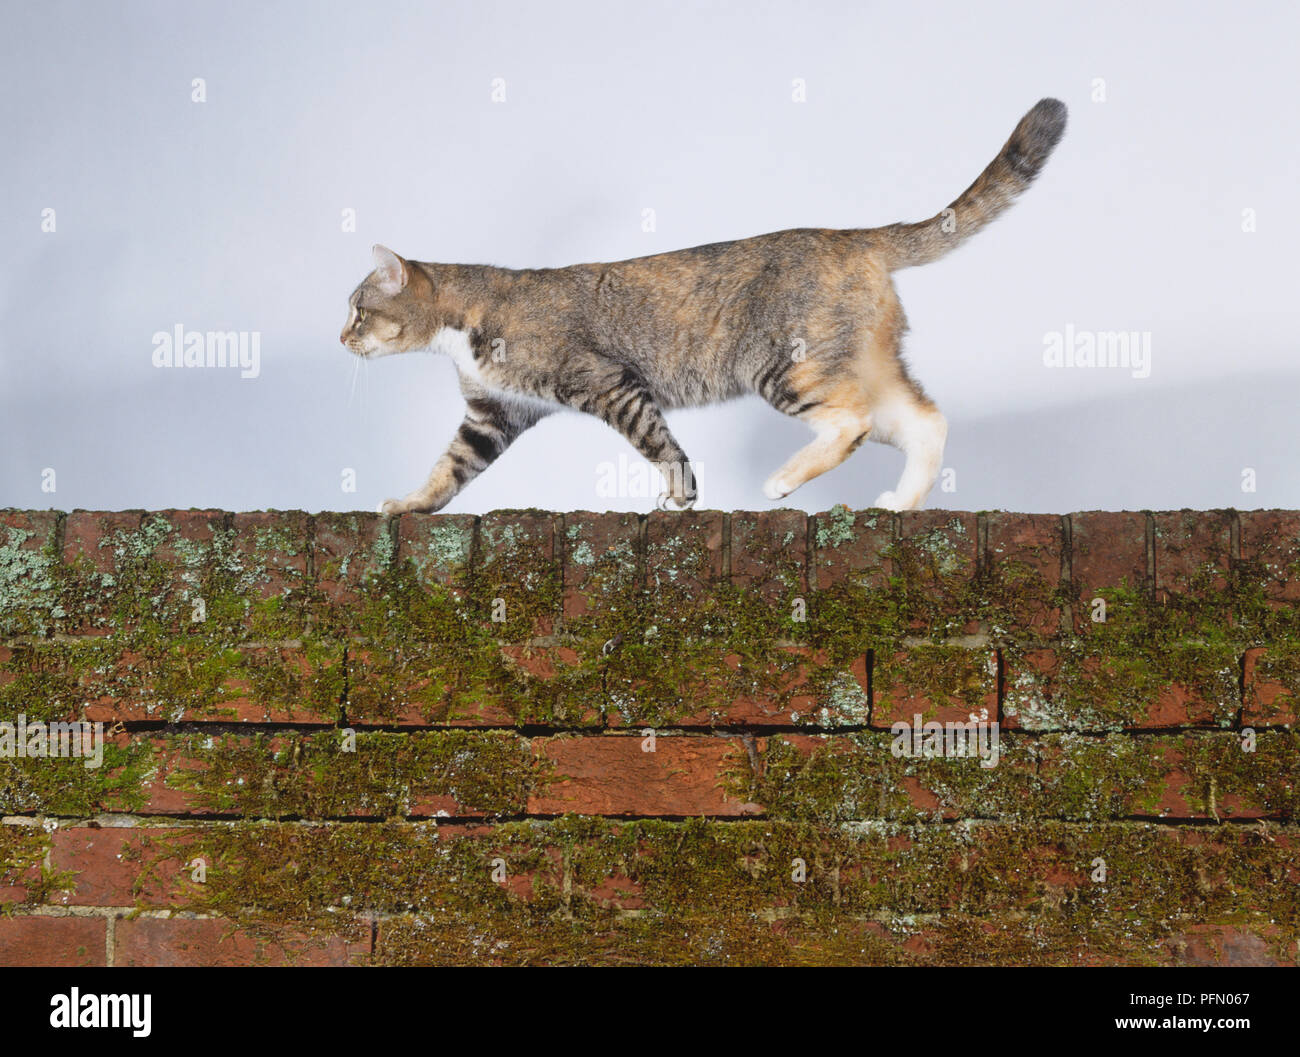 Tabby cat walking across a brick wall, stretching legs out confidently, tail outstretched for balance. Stock Photo